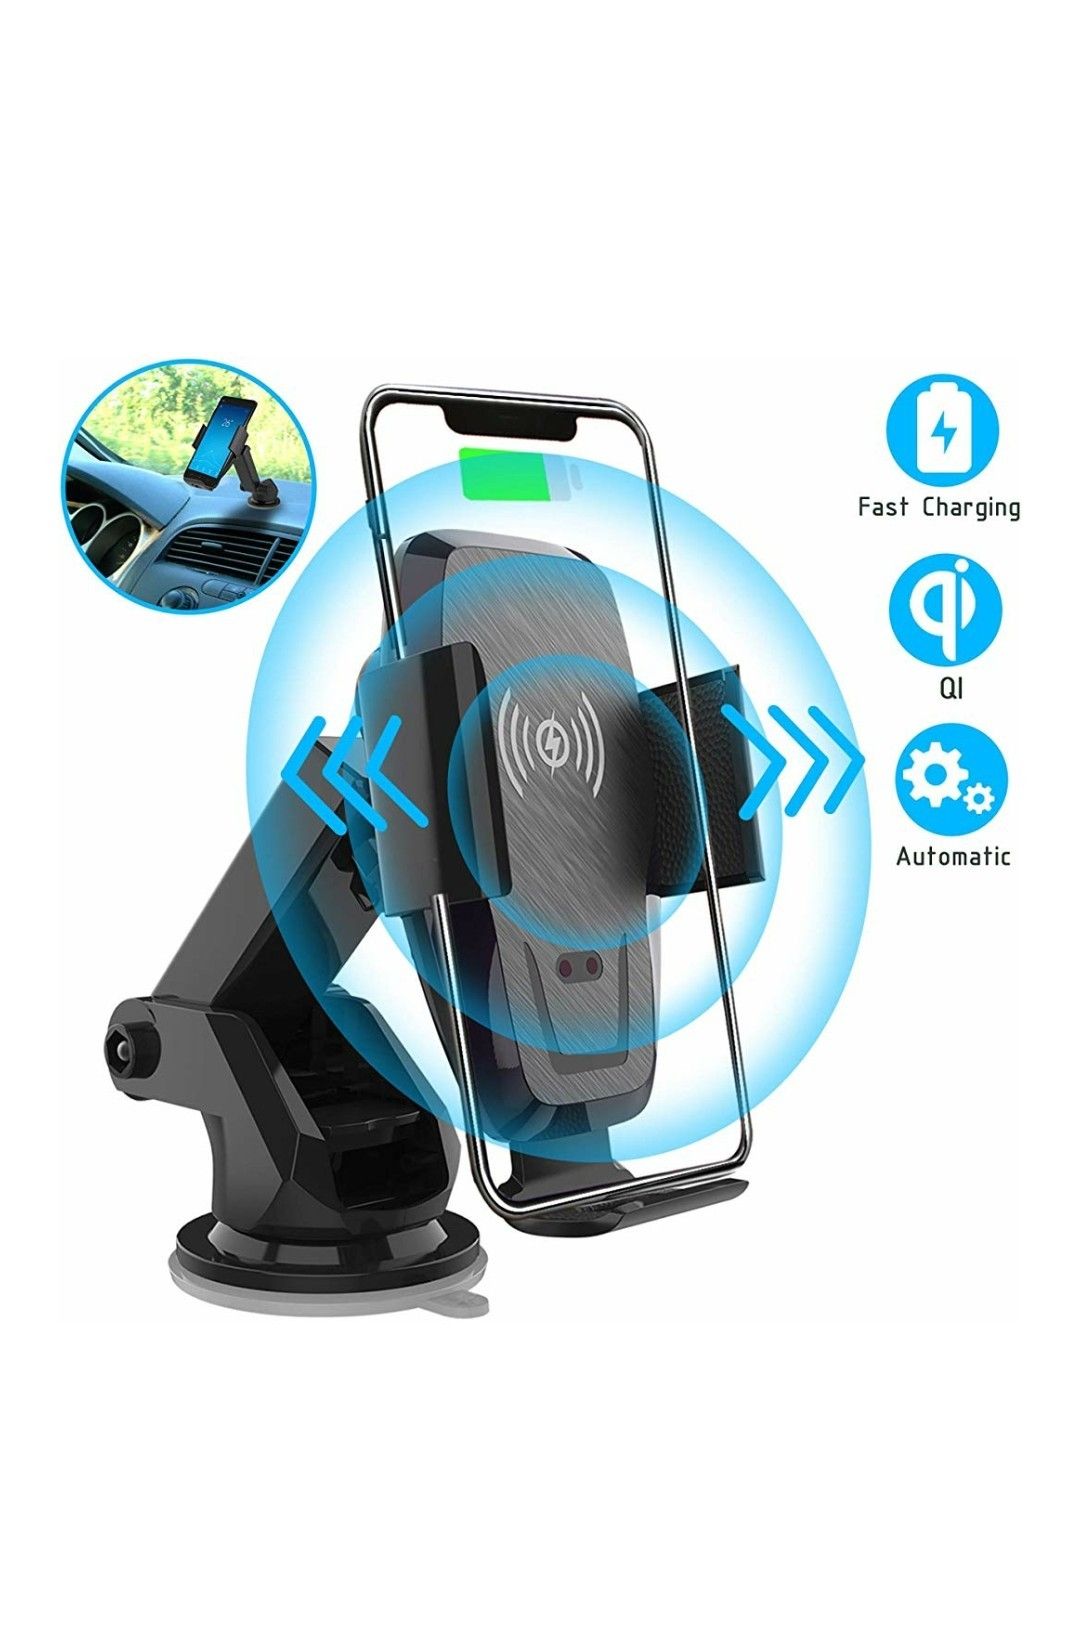 Iotton Wireless Car Charger, Auto-Clamp 10W/7.5W Qi Fast Charging Car Mount, Windshield Dash Air Vent Phone Holder